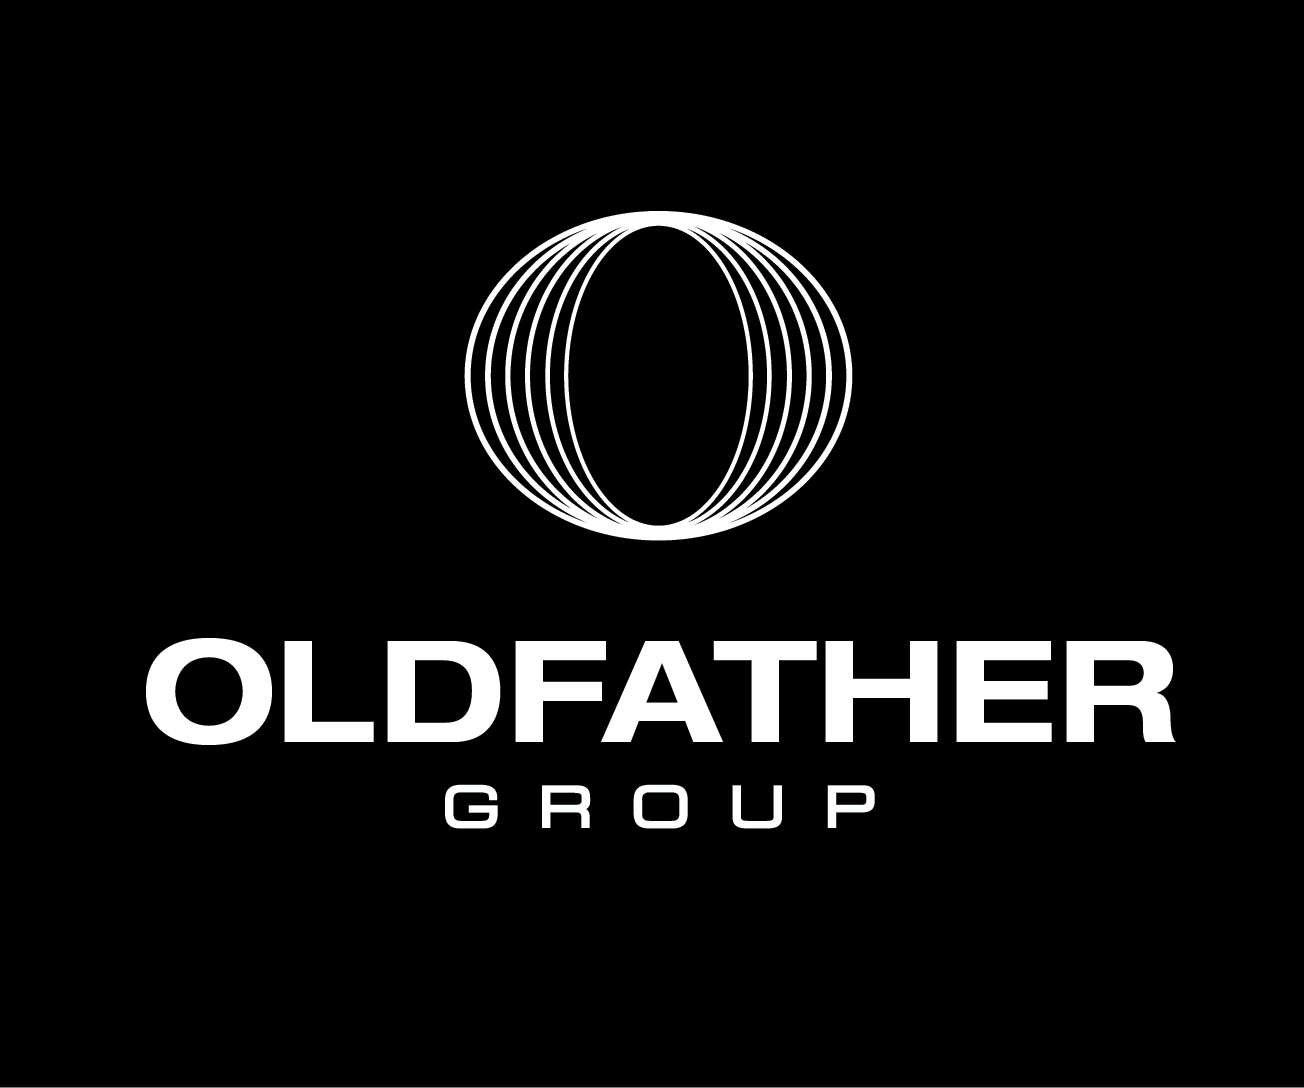 Oldfather Group Black and White Logo